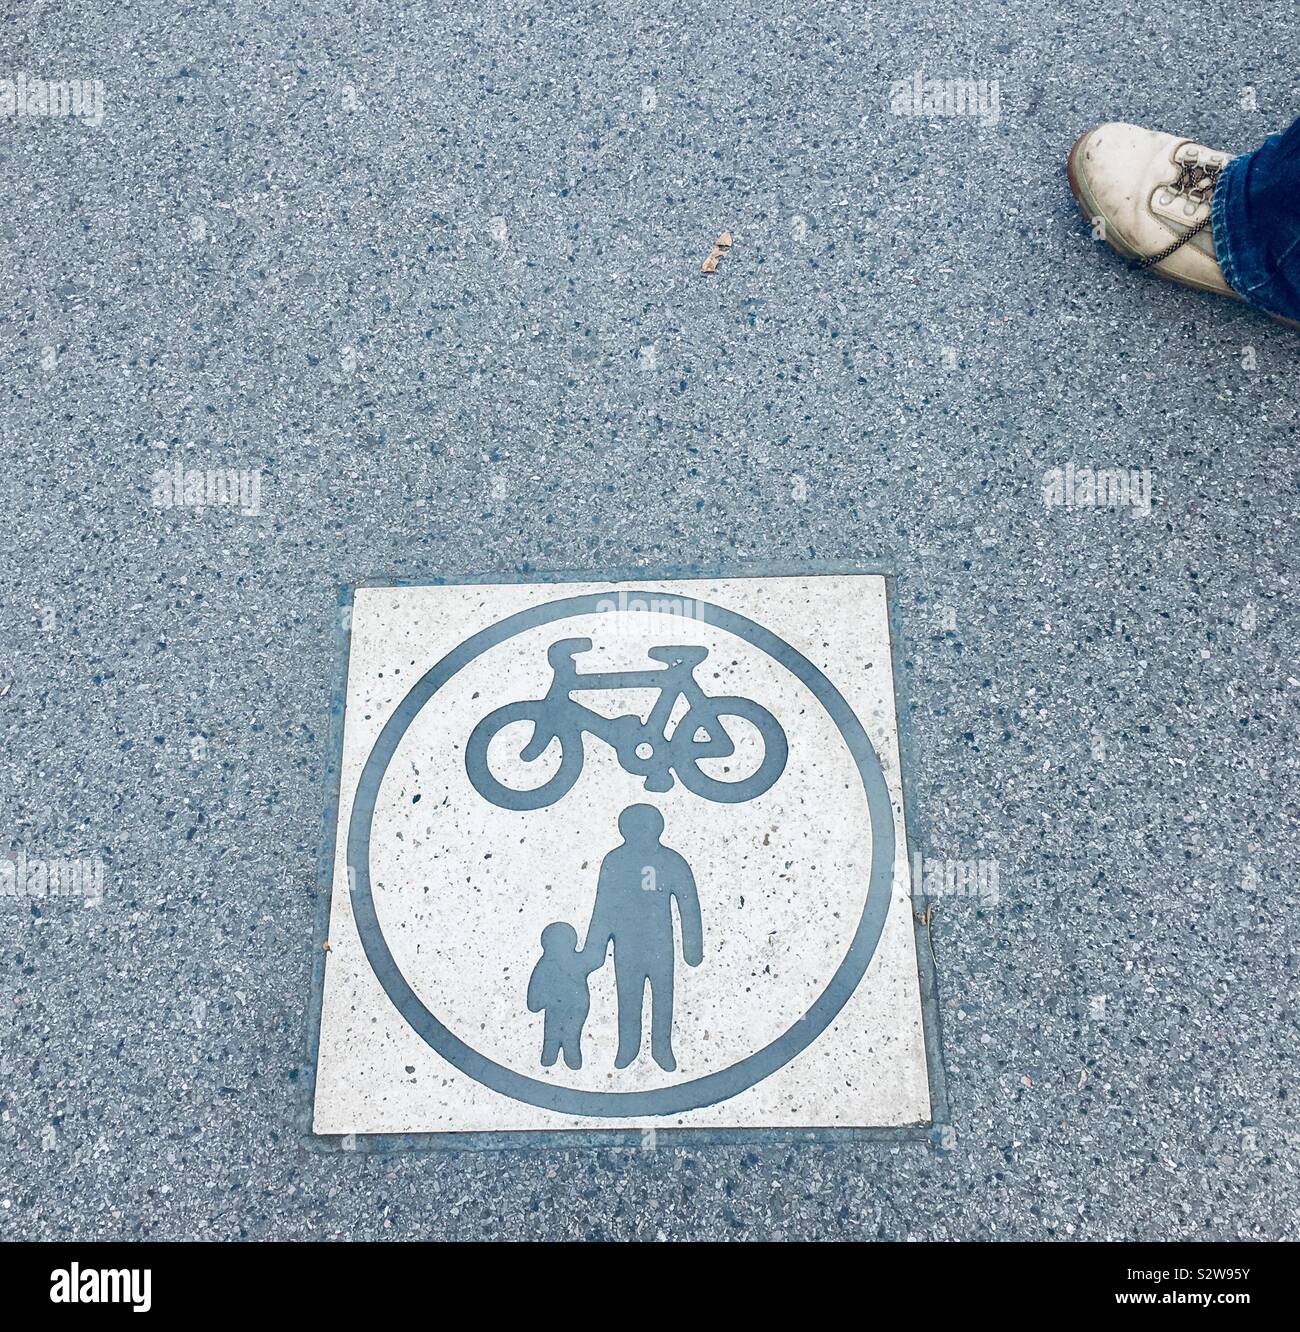 Aerial view of pair of a male's foot near traffic safety marking on tarred road - British pedestrian and cycling lane symbol - picture of a bicycle and a man with a child holding hands inside a circle Stock Photo